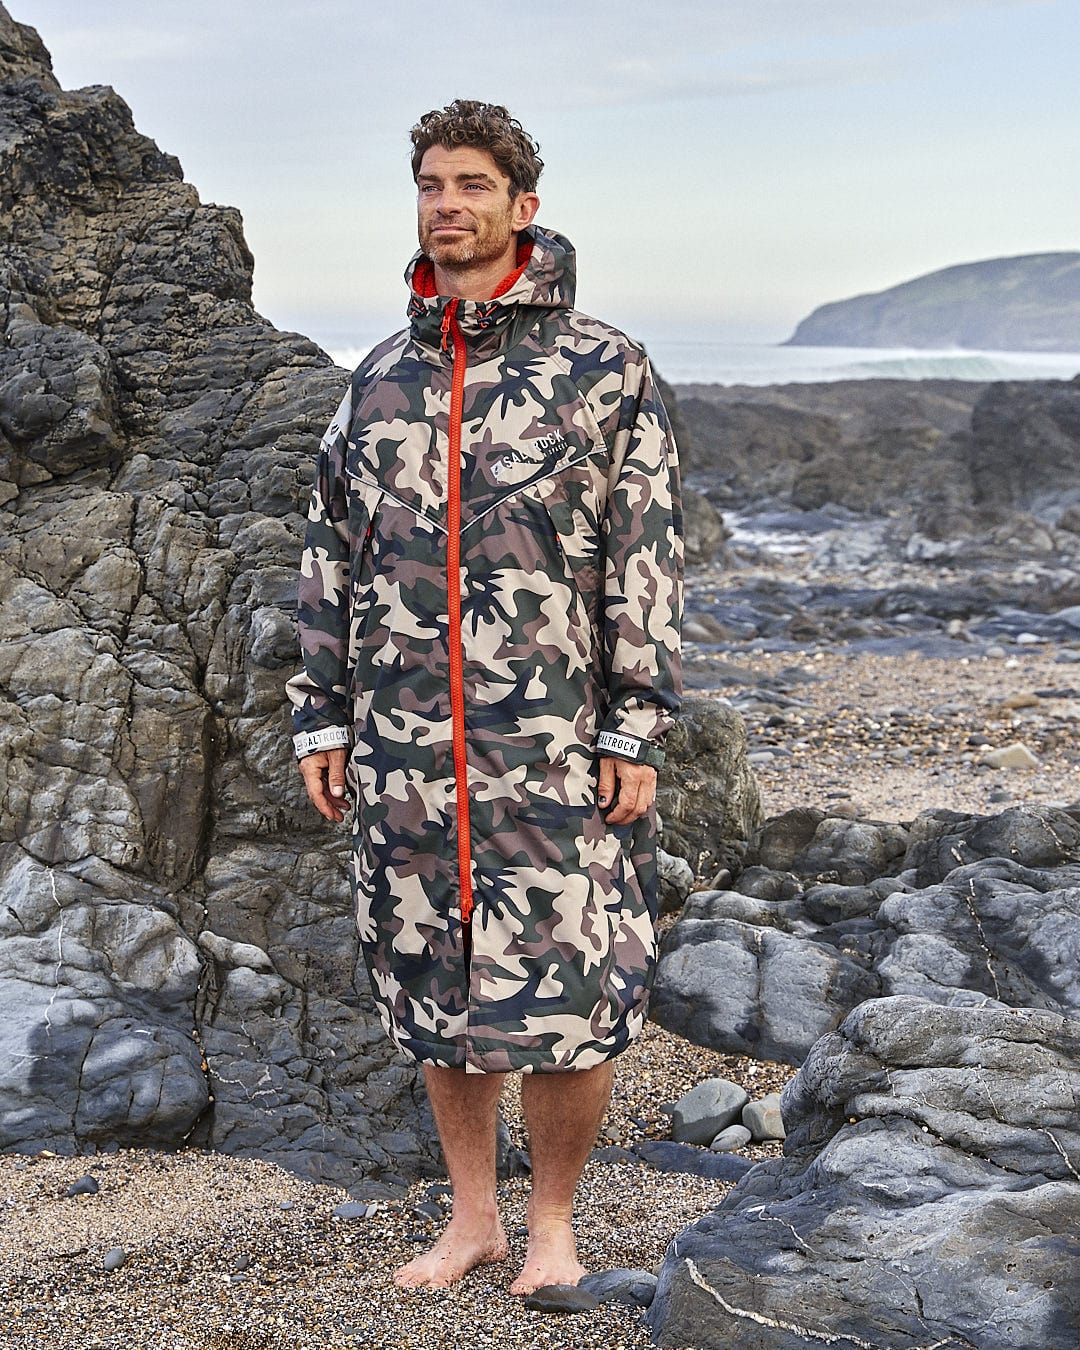 A man in a Saltrock Recycled Four Seasons Changing Robe - Brown Camo stands barefoot on a rocky shore with the ocean in the background.